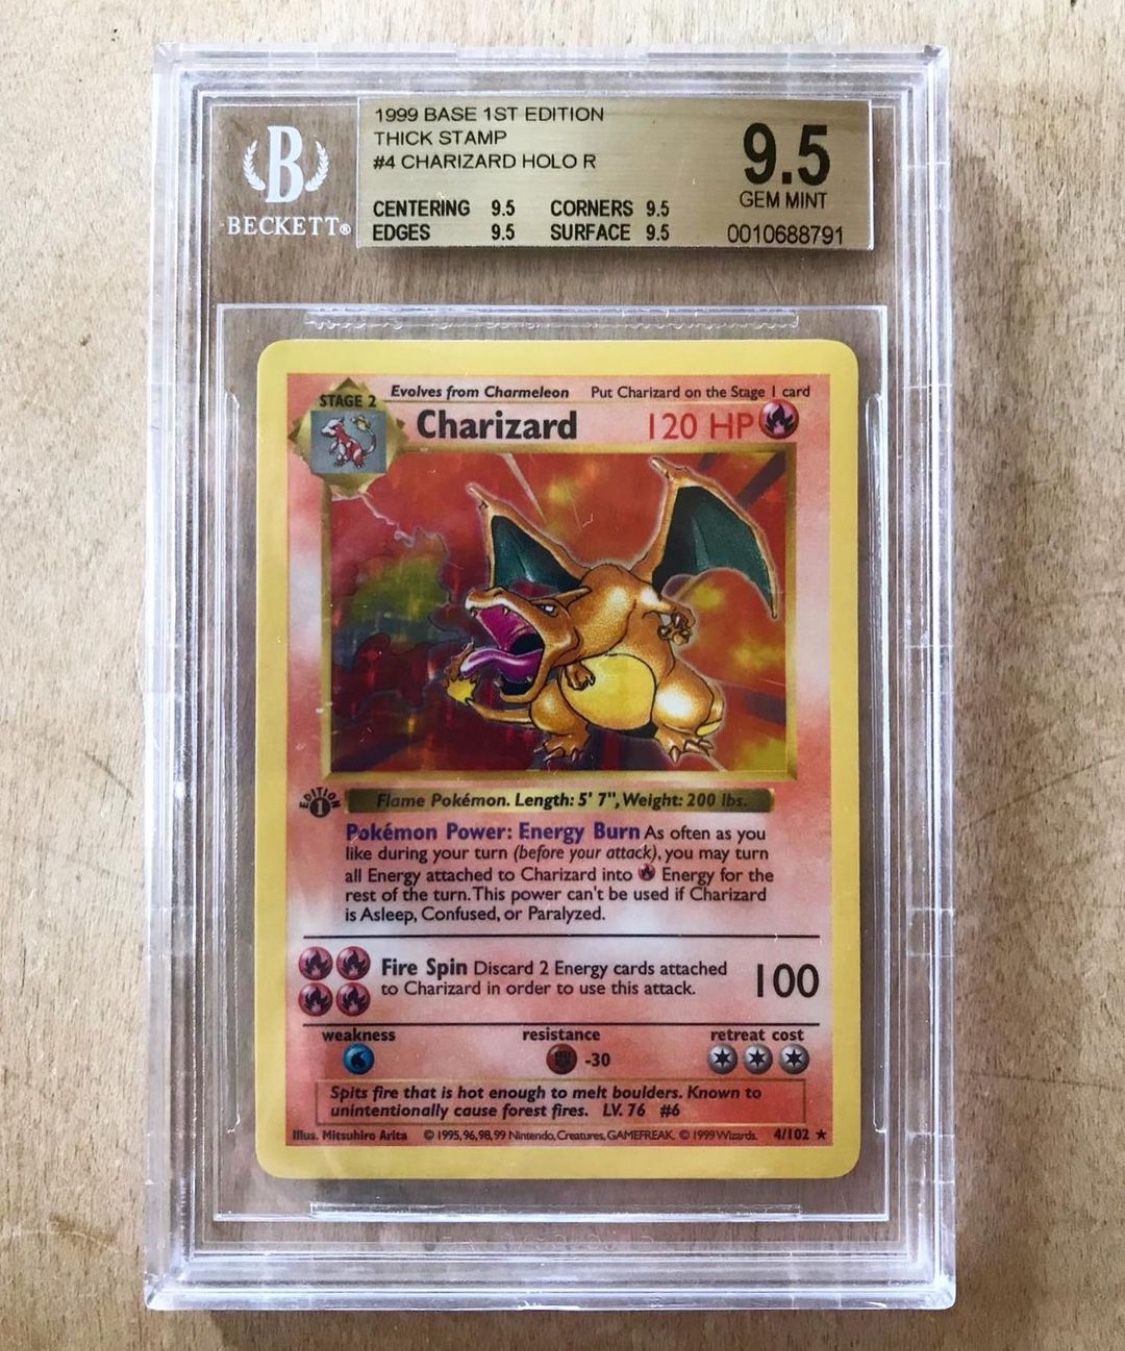 1999 Pokemon Base 1st  Thick Stamp Edition #4 Charizard HOLO R,BGS 9.5 GEM MINT